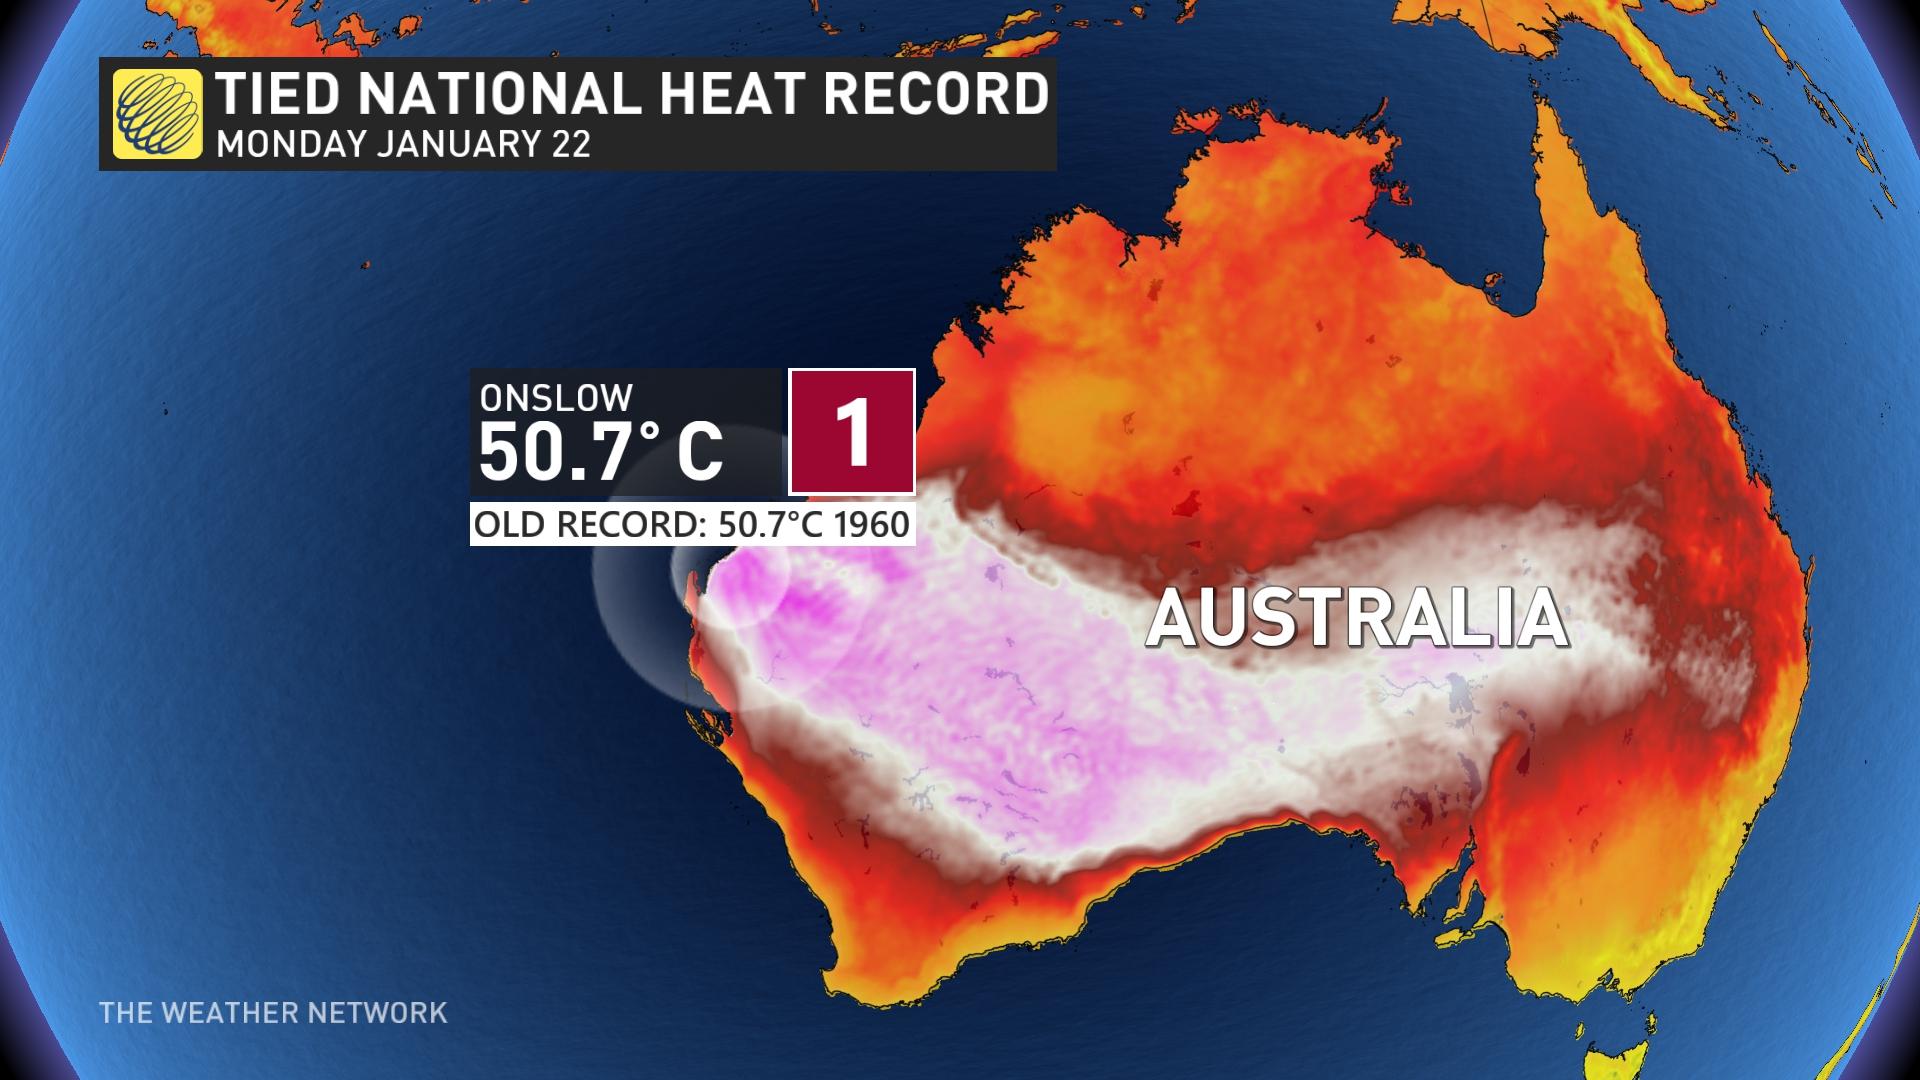 australia’s all-time heat record in jeopardy as temperatures soar